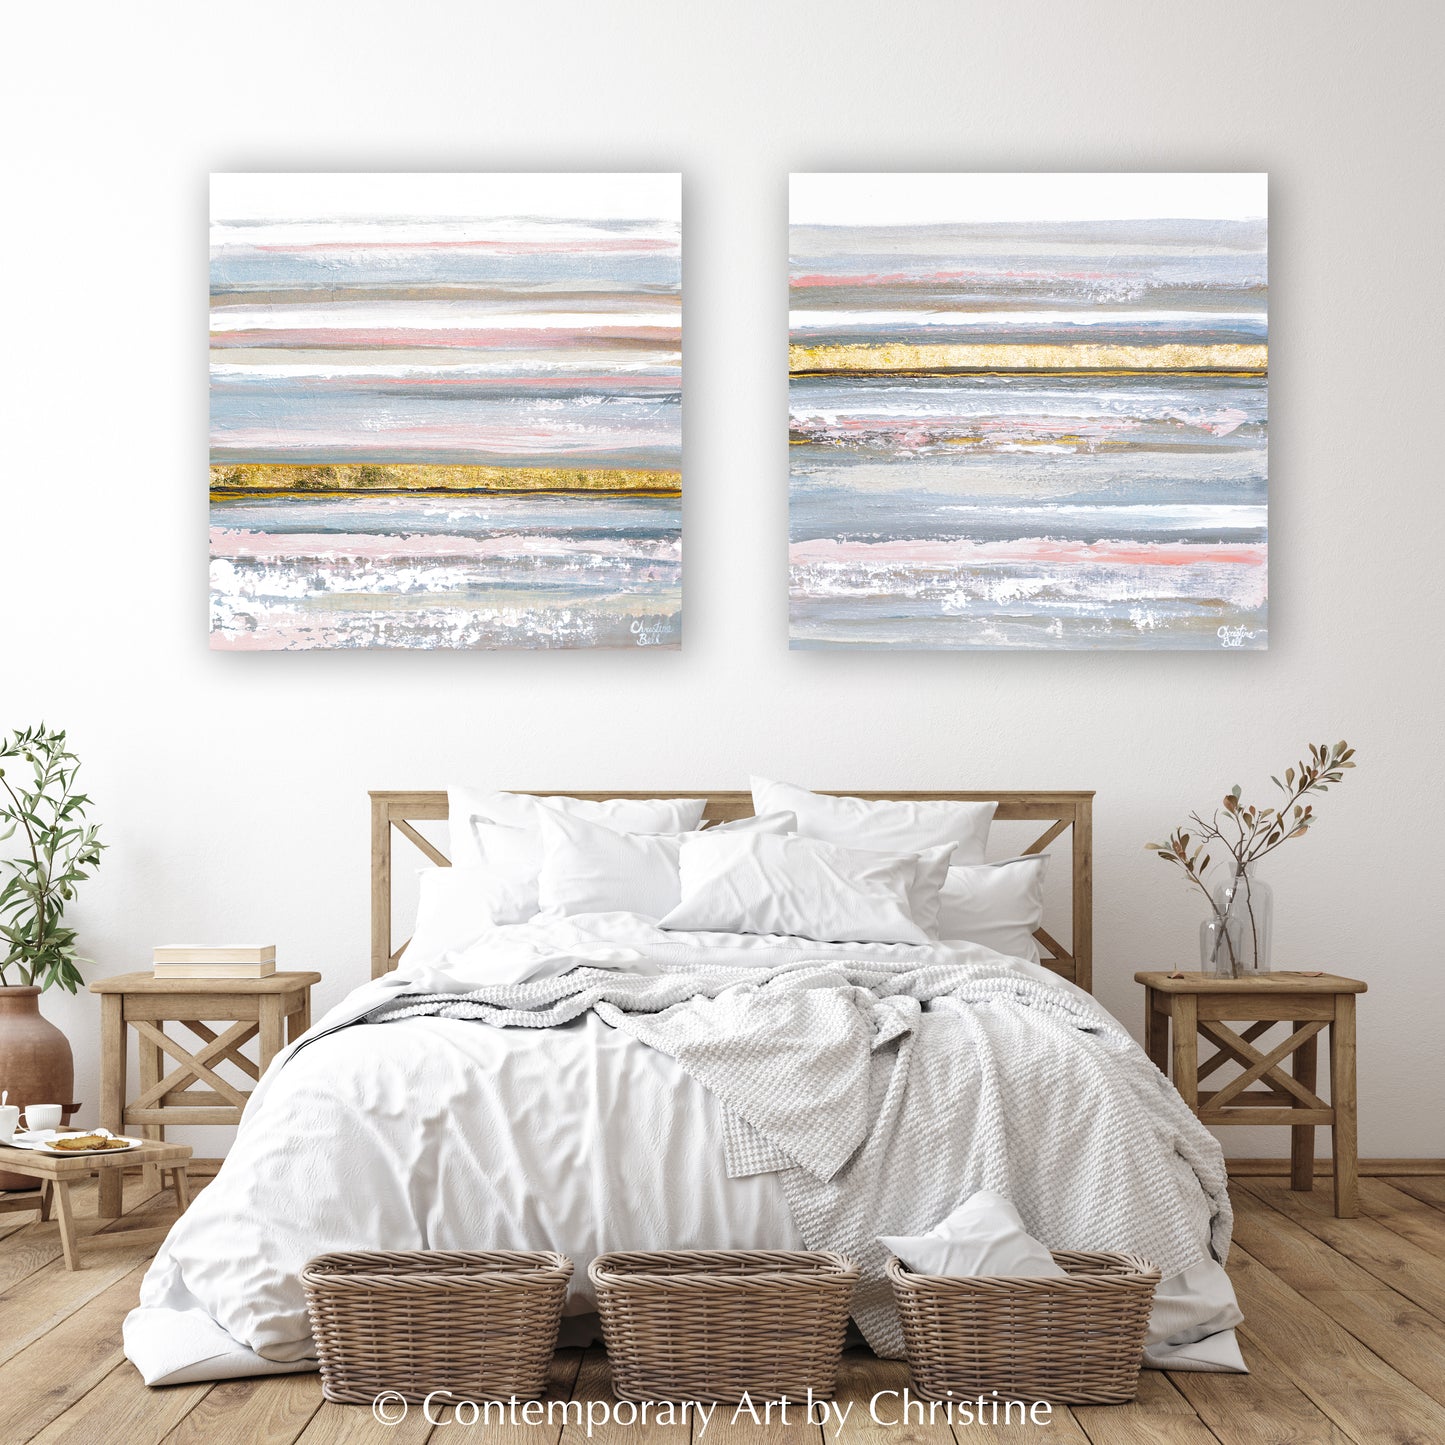 "Rose Gold II" ORIGINAL Art Abstract Painting Textured Neutral White Pink Gold Leaf Coastal Landscape Seascape 24x24"